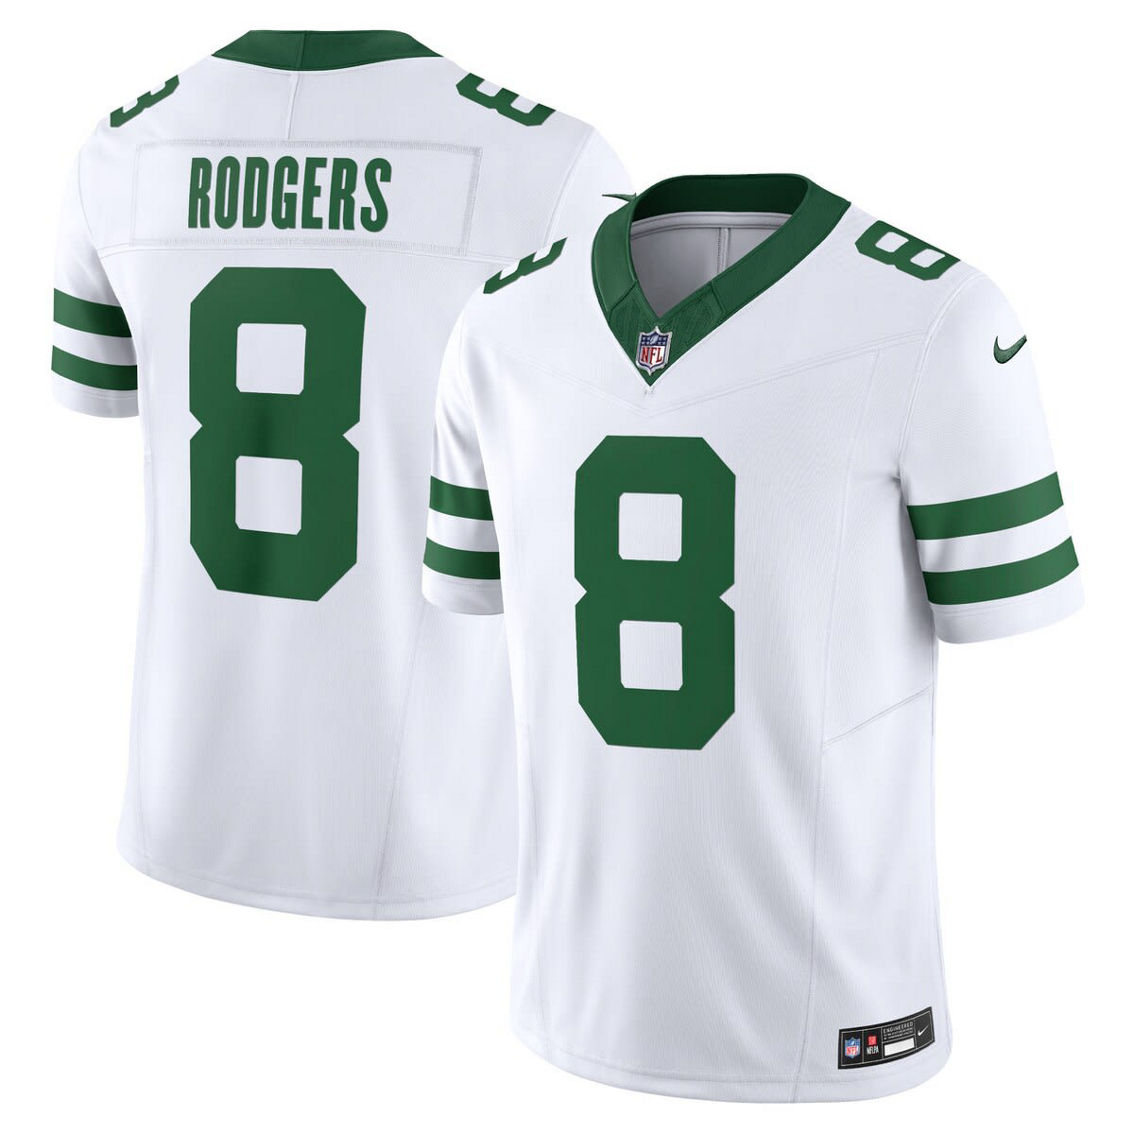 Nike Men's Aaron Rodgers Legacy White New York Jets Vapor F.U.S.E. Limited Jersey - Image 2 of 4